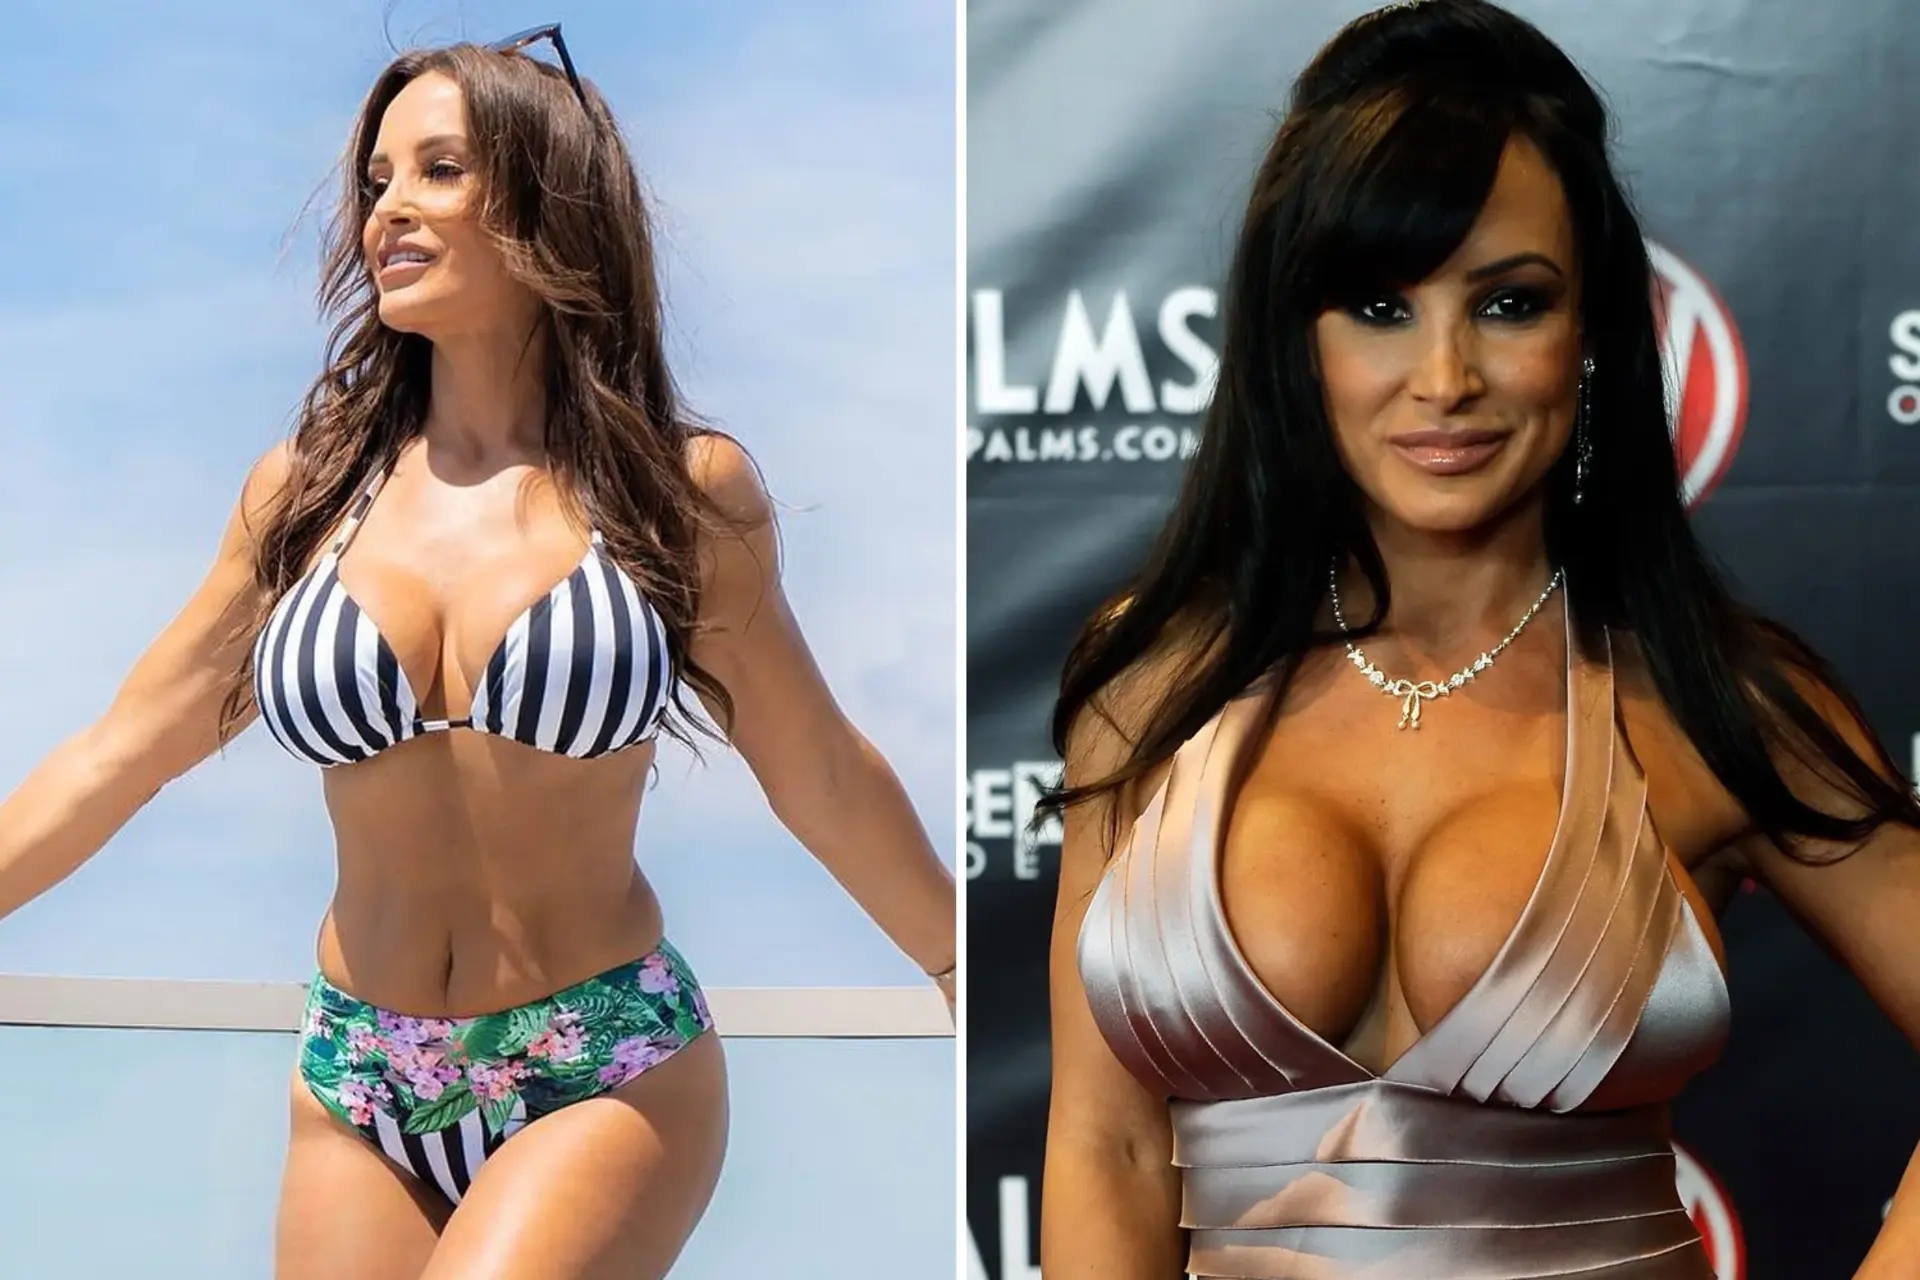 april palacio recommends How Old Is Pornstar Lisa Ann